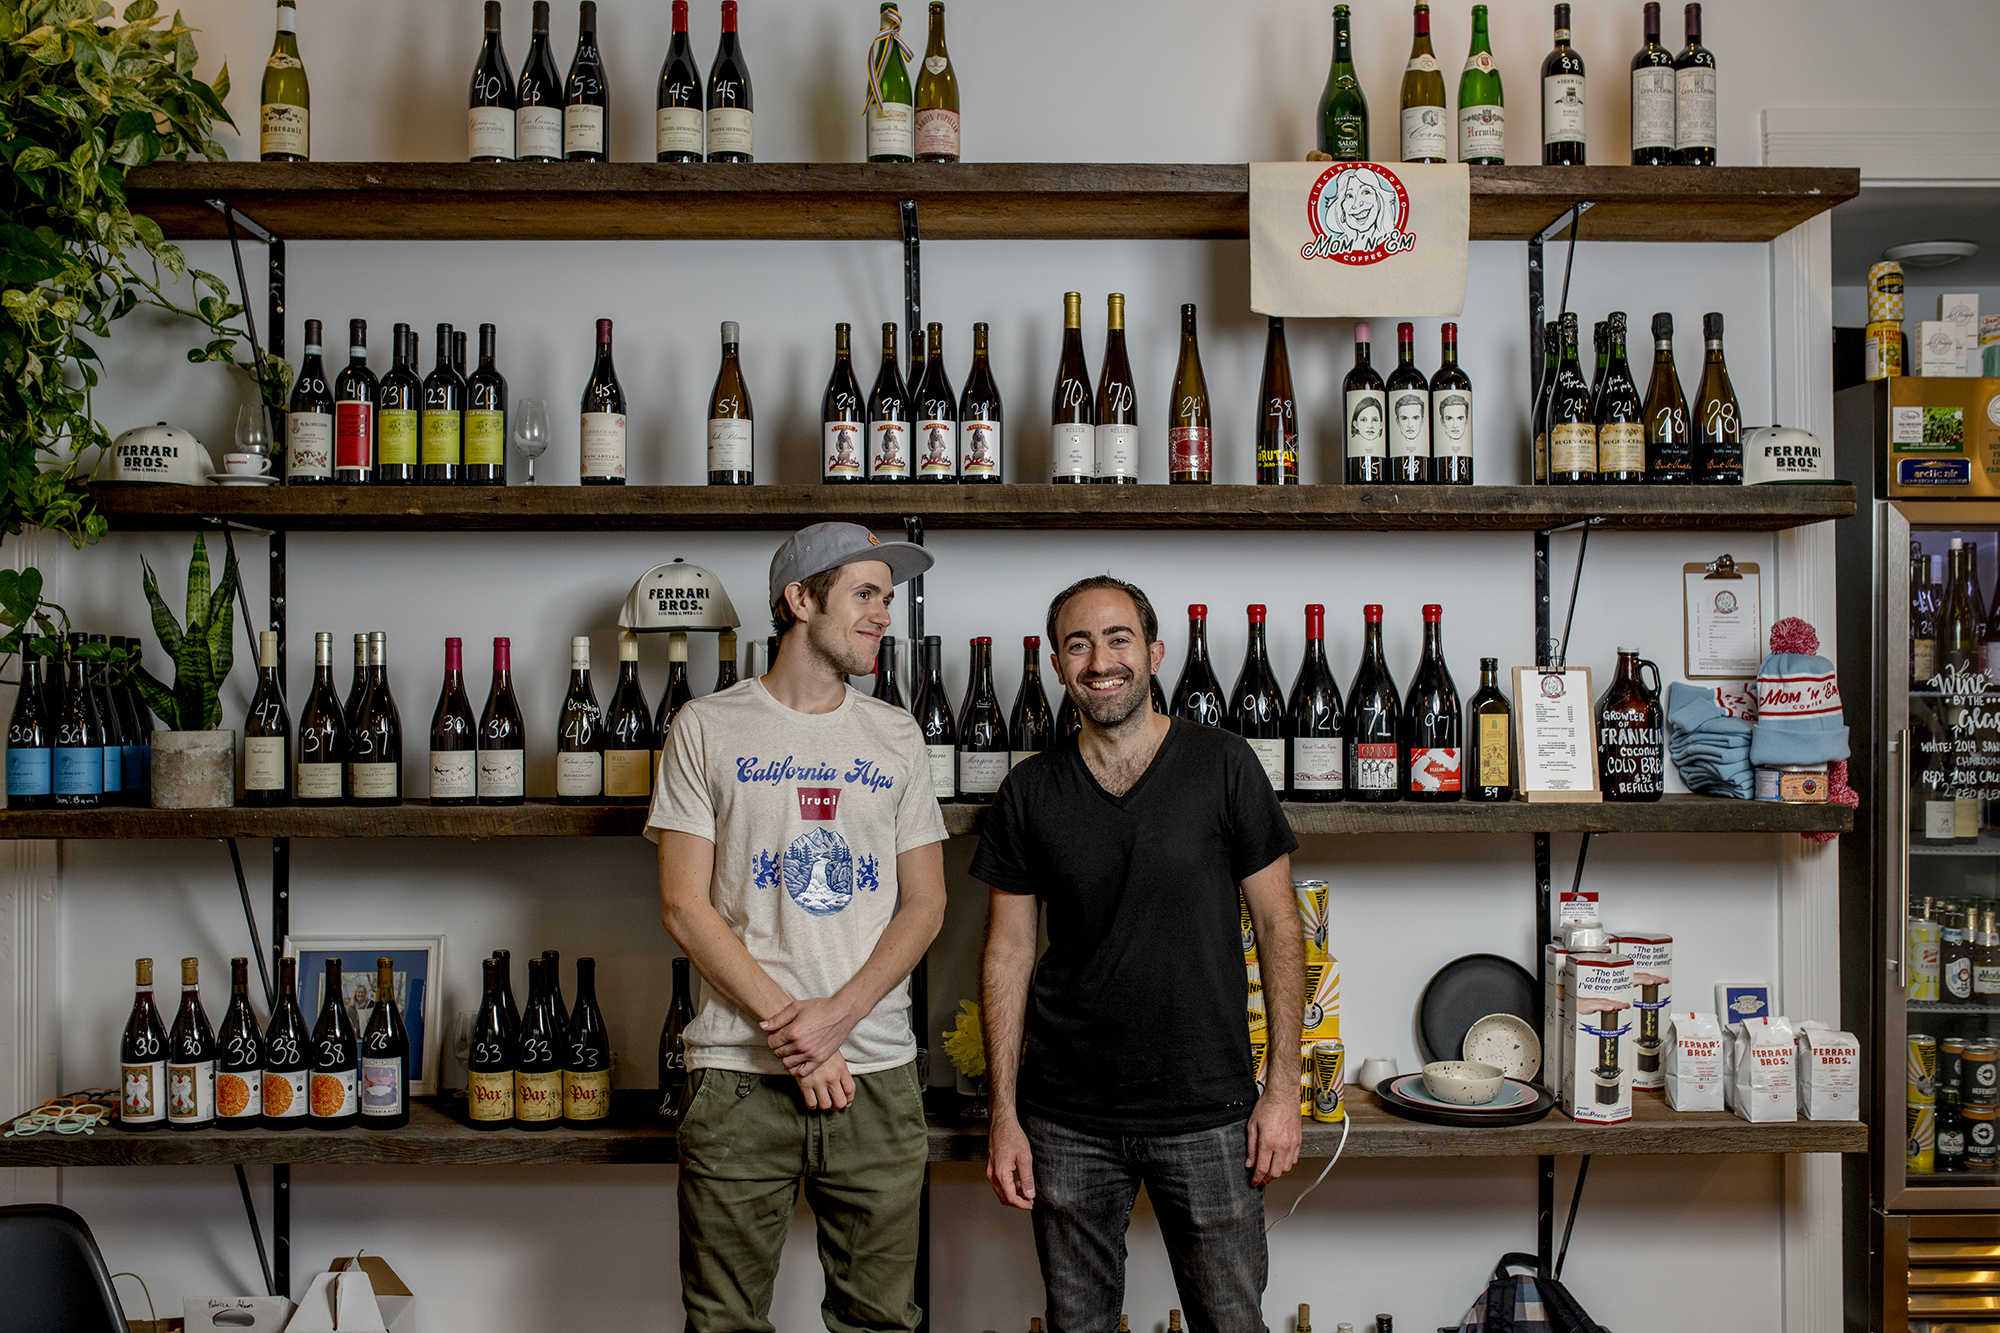  Austin (left) and Tony Ferrari (right) inside  Mom ‘n ‘em Coffee &amp; Wine  on Colerain Ave. in Camp Washington. || Image:  Twin Spire Photography  - Published: 10.2.2019 